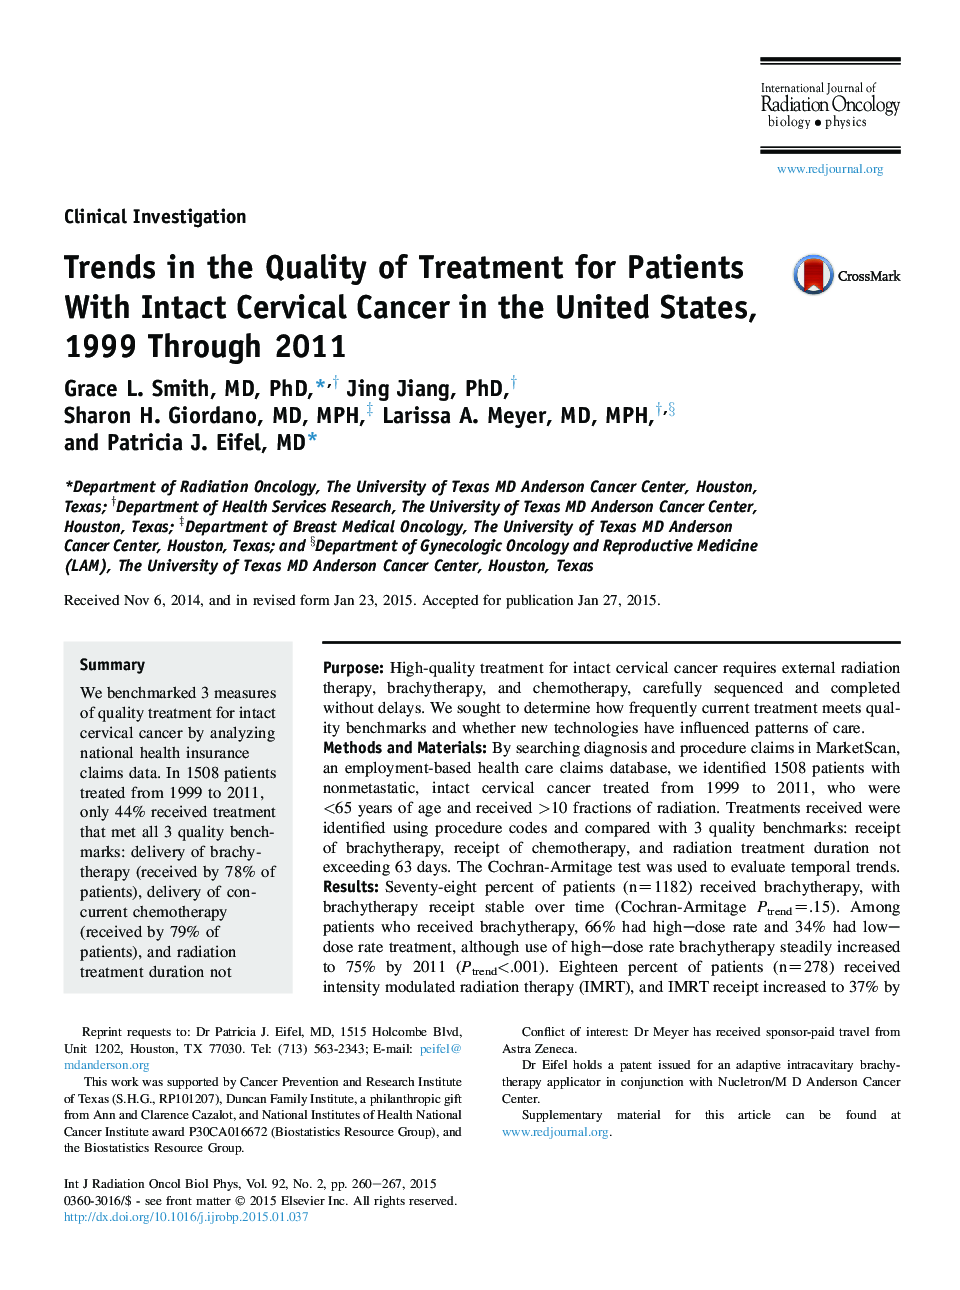 Trends in the Quality of Treatment for Patients With Intact Cervical Cancer in the United States, 1999 Through 2011